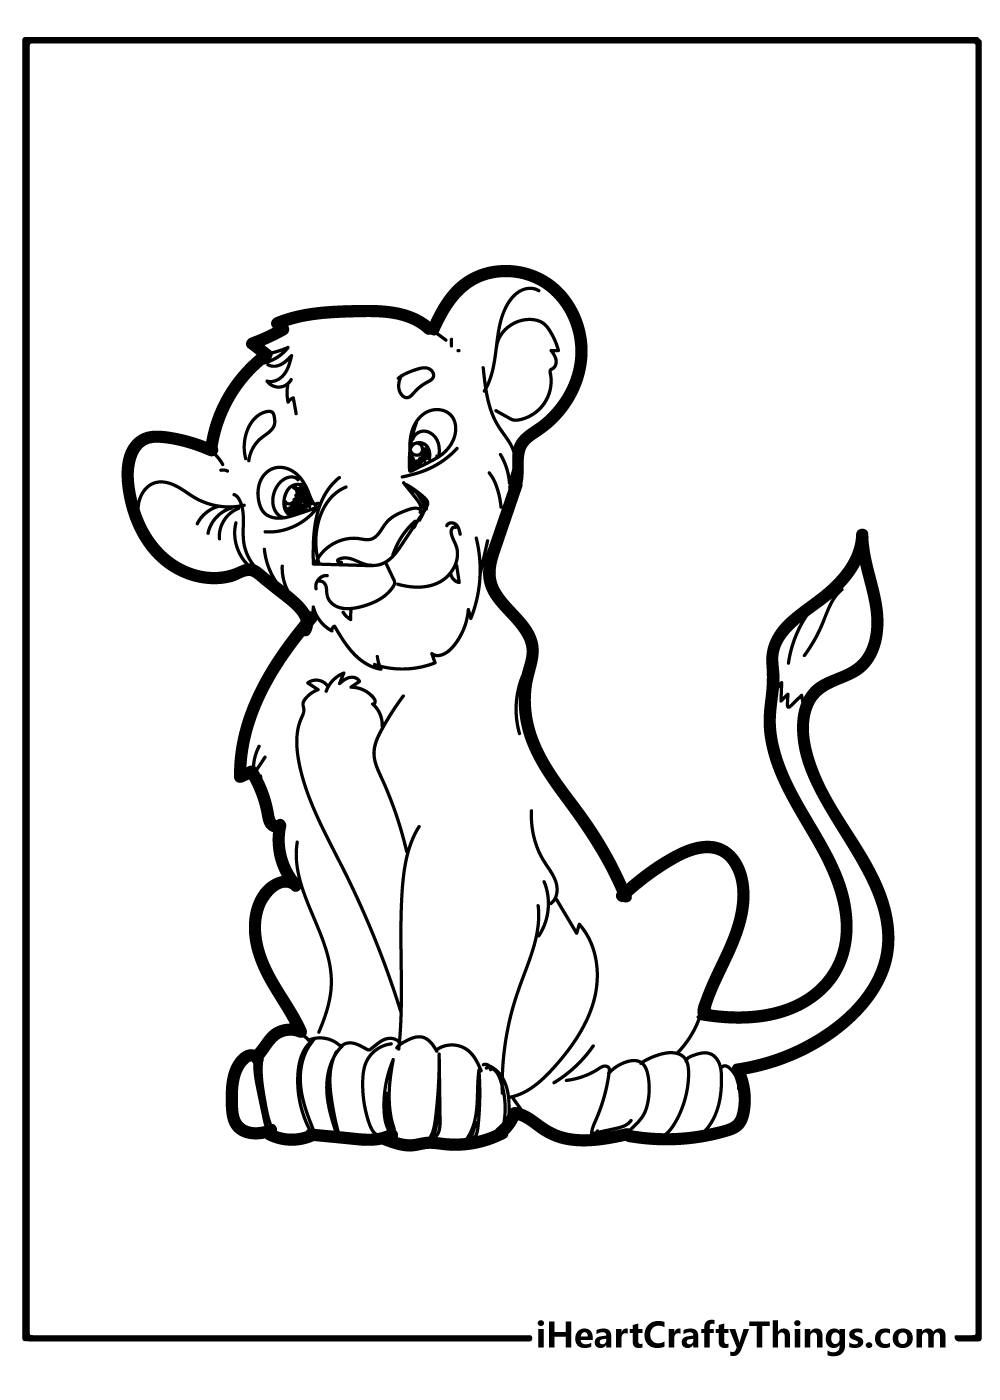 Lion Coloring Book for adults free download